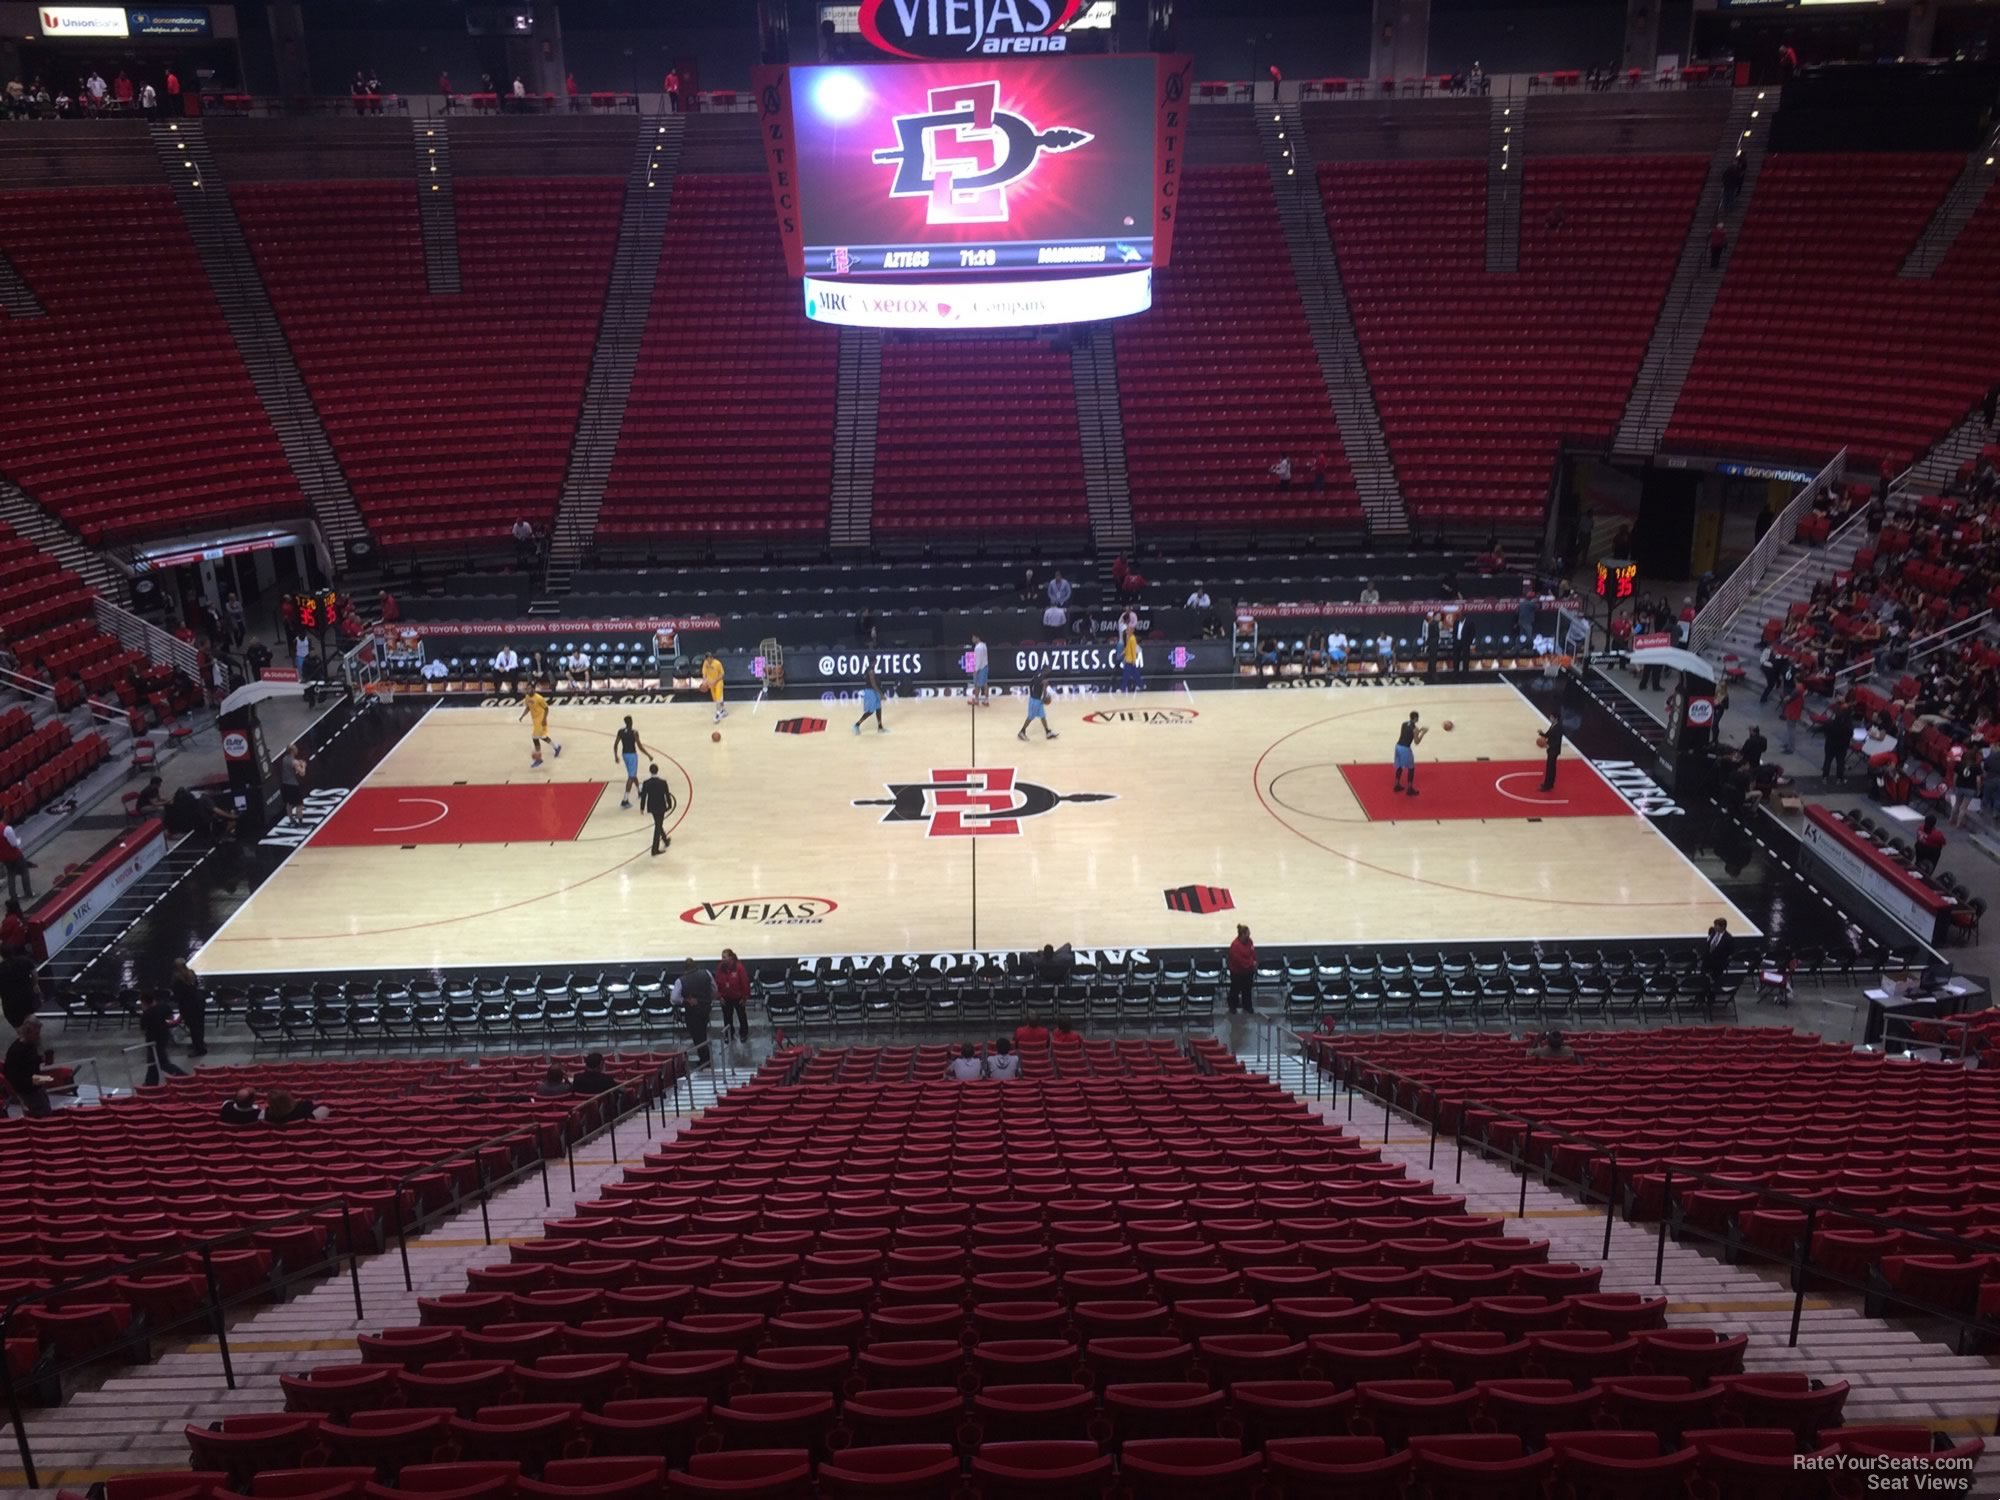 section f, row 30 seat view  - viejas arena